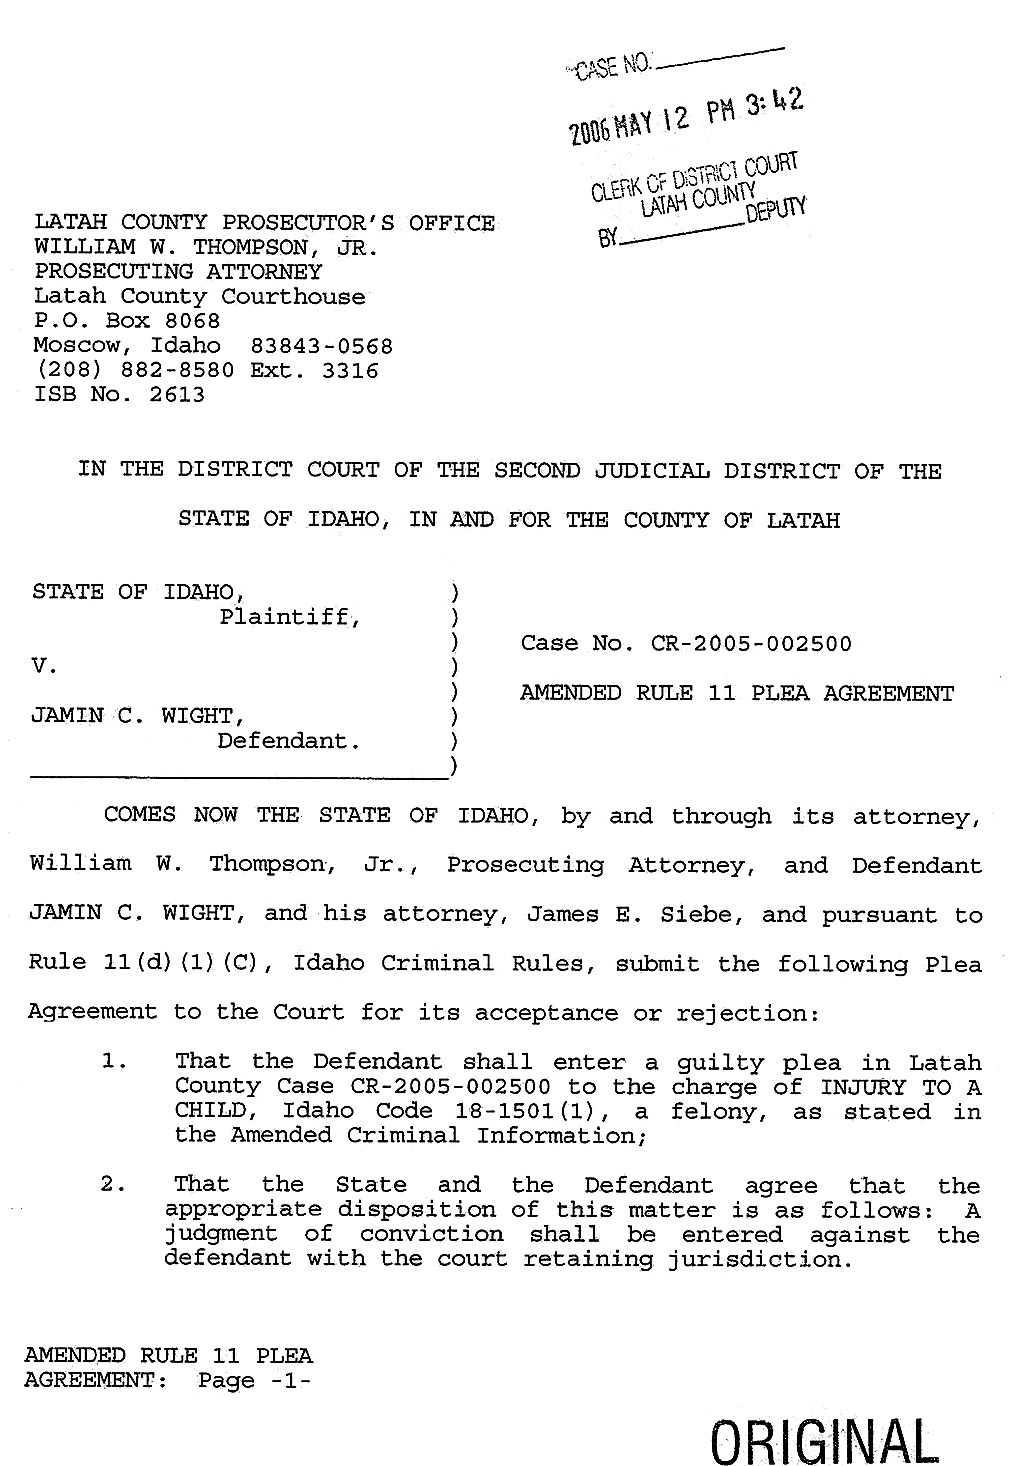 Amended Rule 11 Plea Agreement page 1